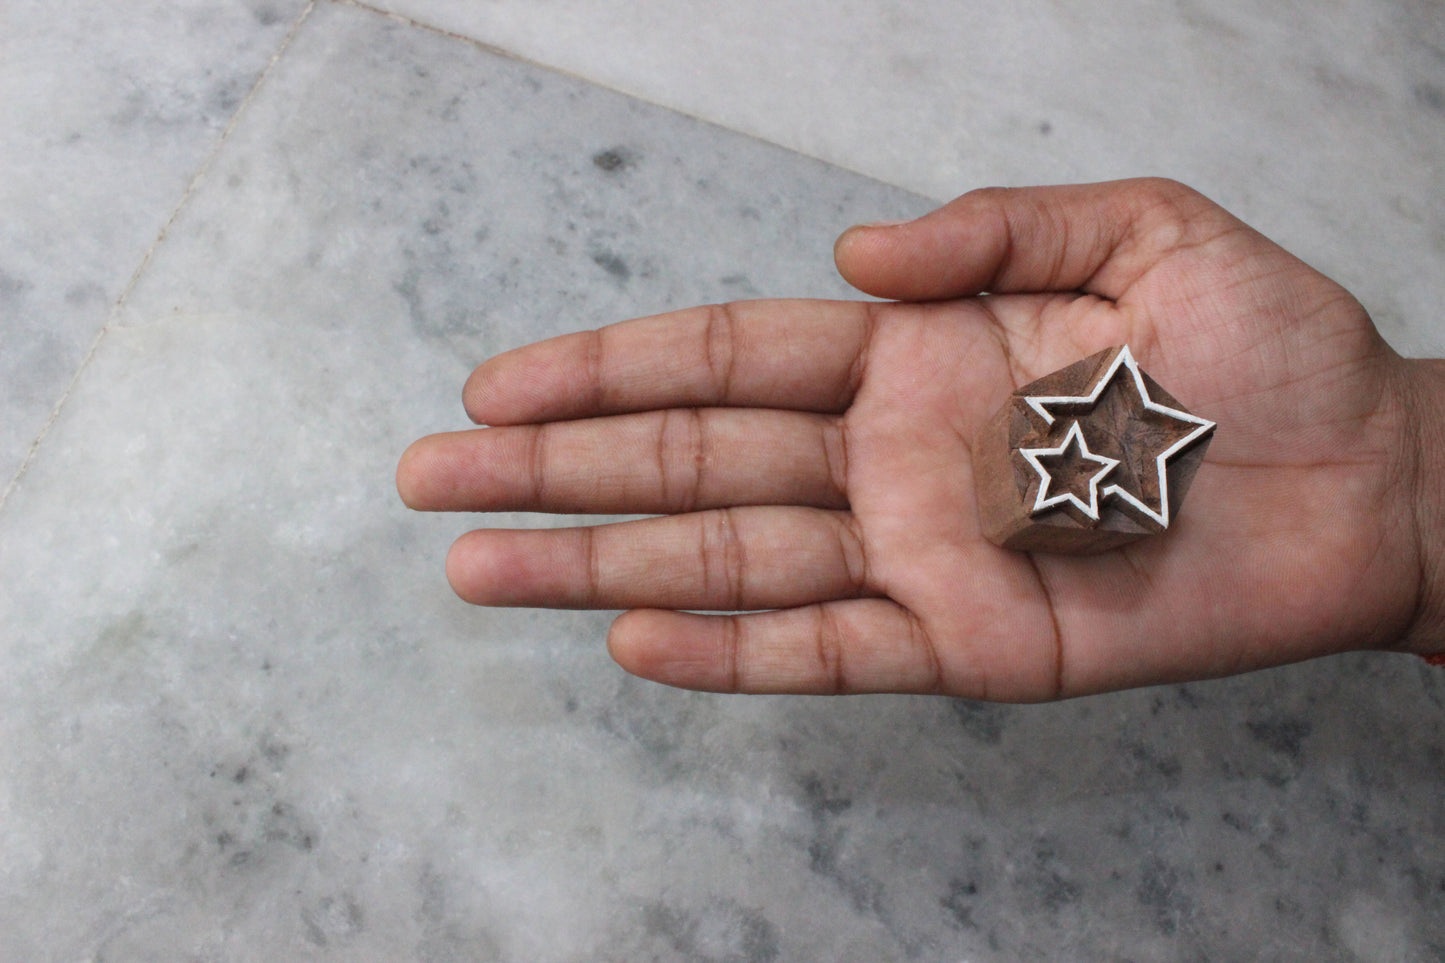 Star Fabric Stamp Hand Carved Block Print Stamp Handmade Stamp Hand Carved Wooden Stamp For Printing Hand Carved Soap Stamp Traditional Wooden Block